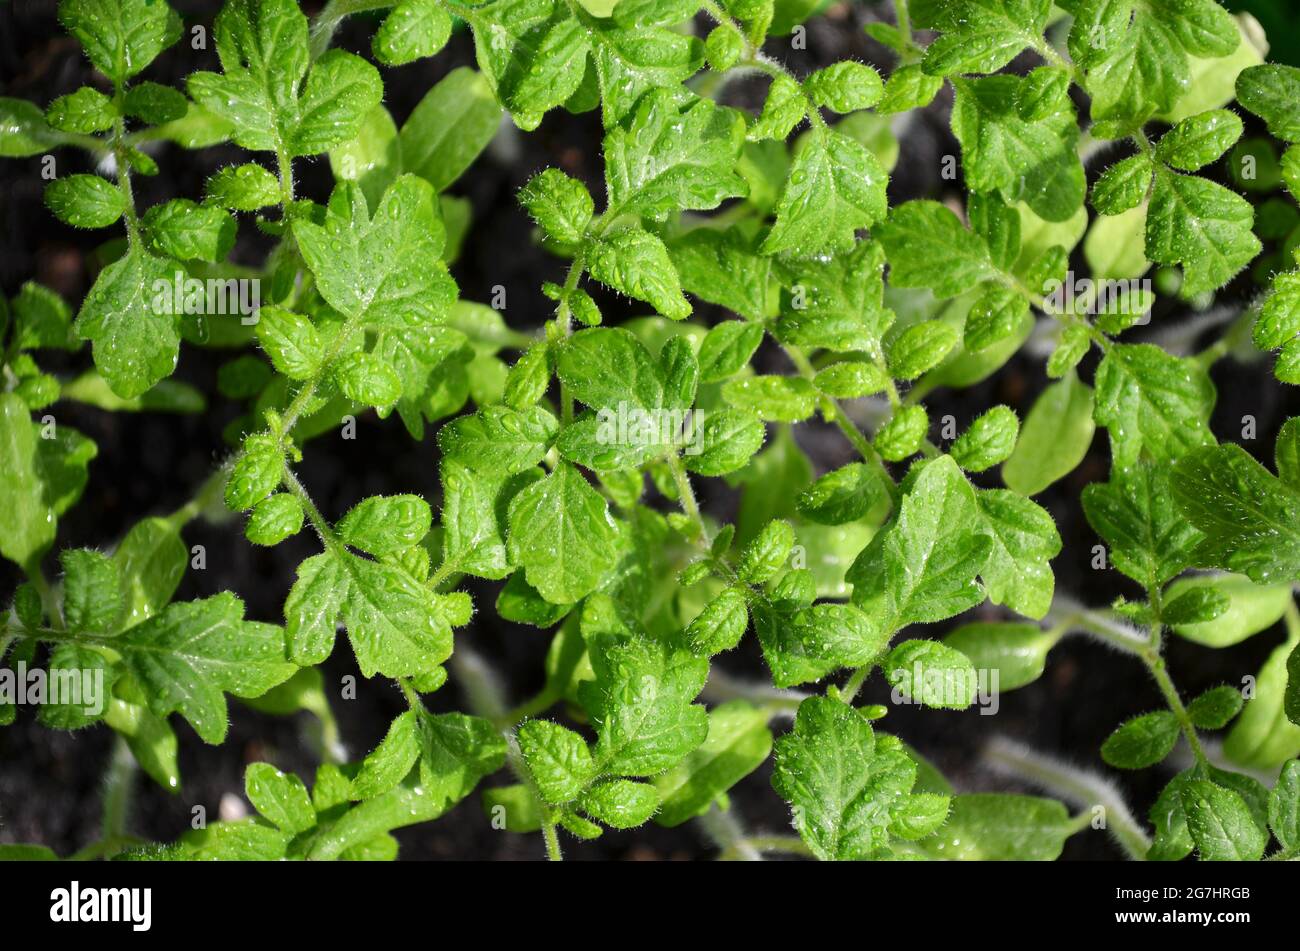 Tomato seedlings with drops of water on the leaves as a green background, top view. Concept of organic agriculture. Stock Photo